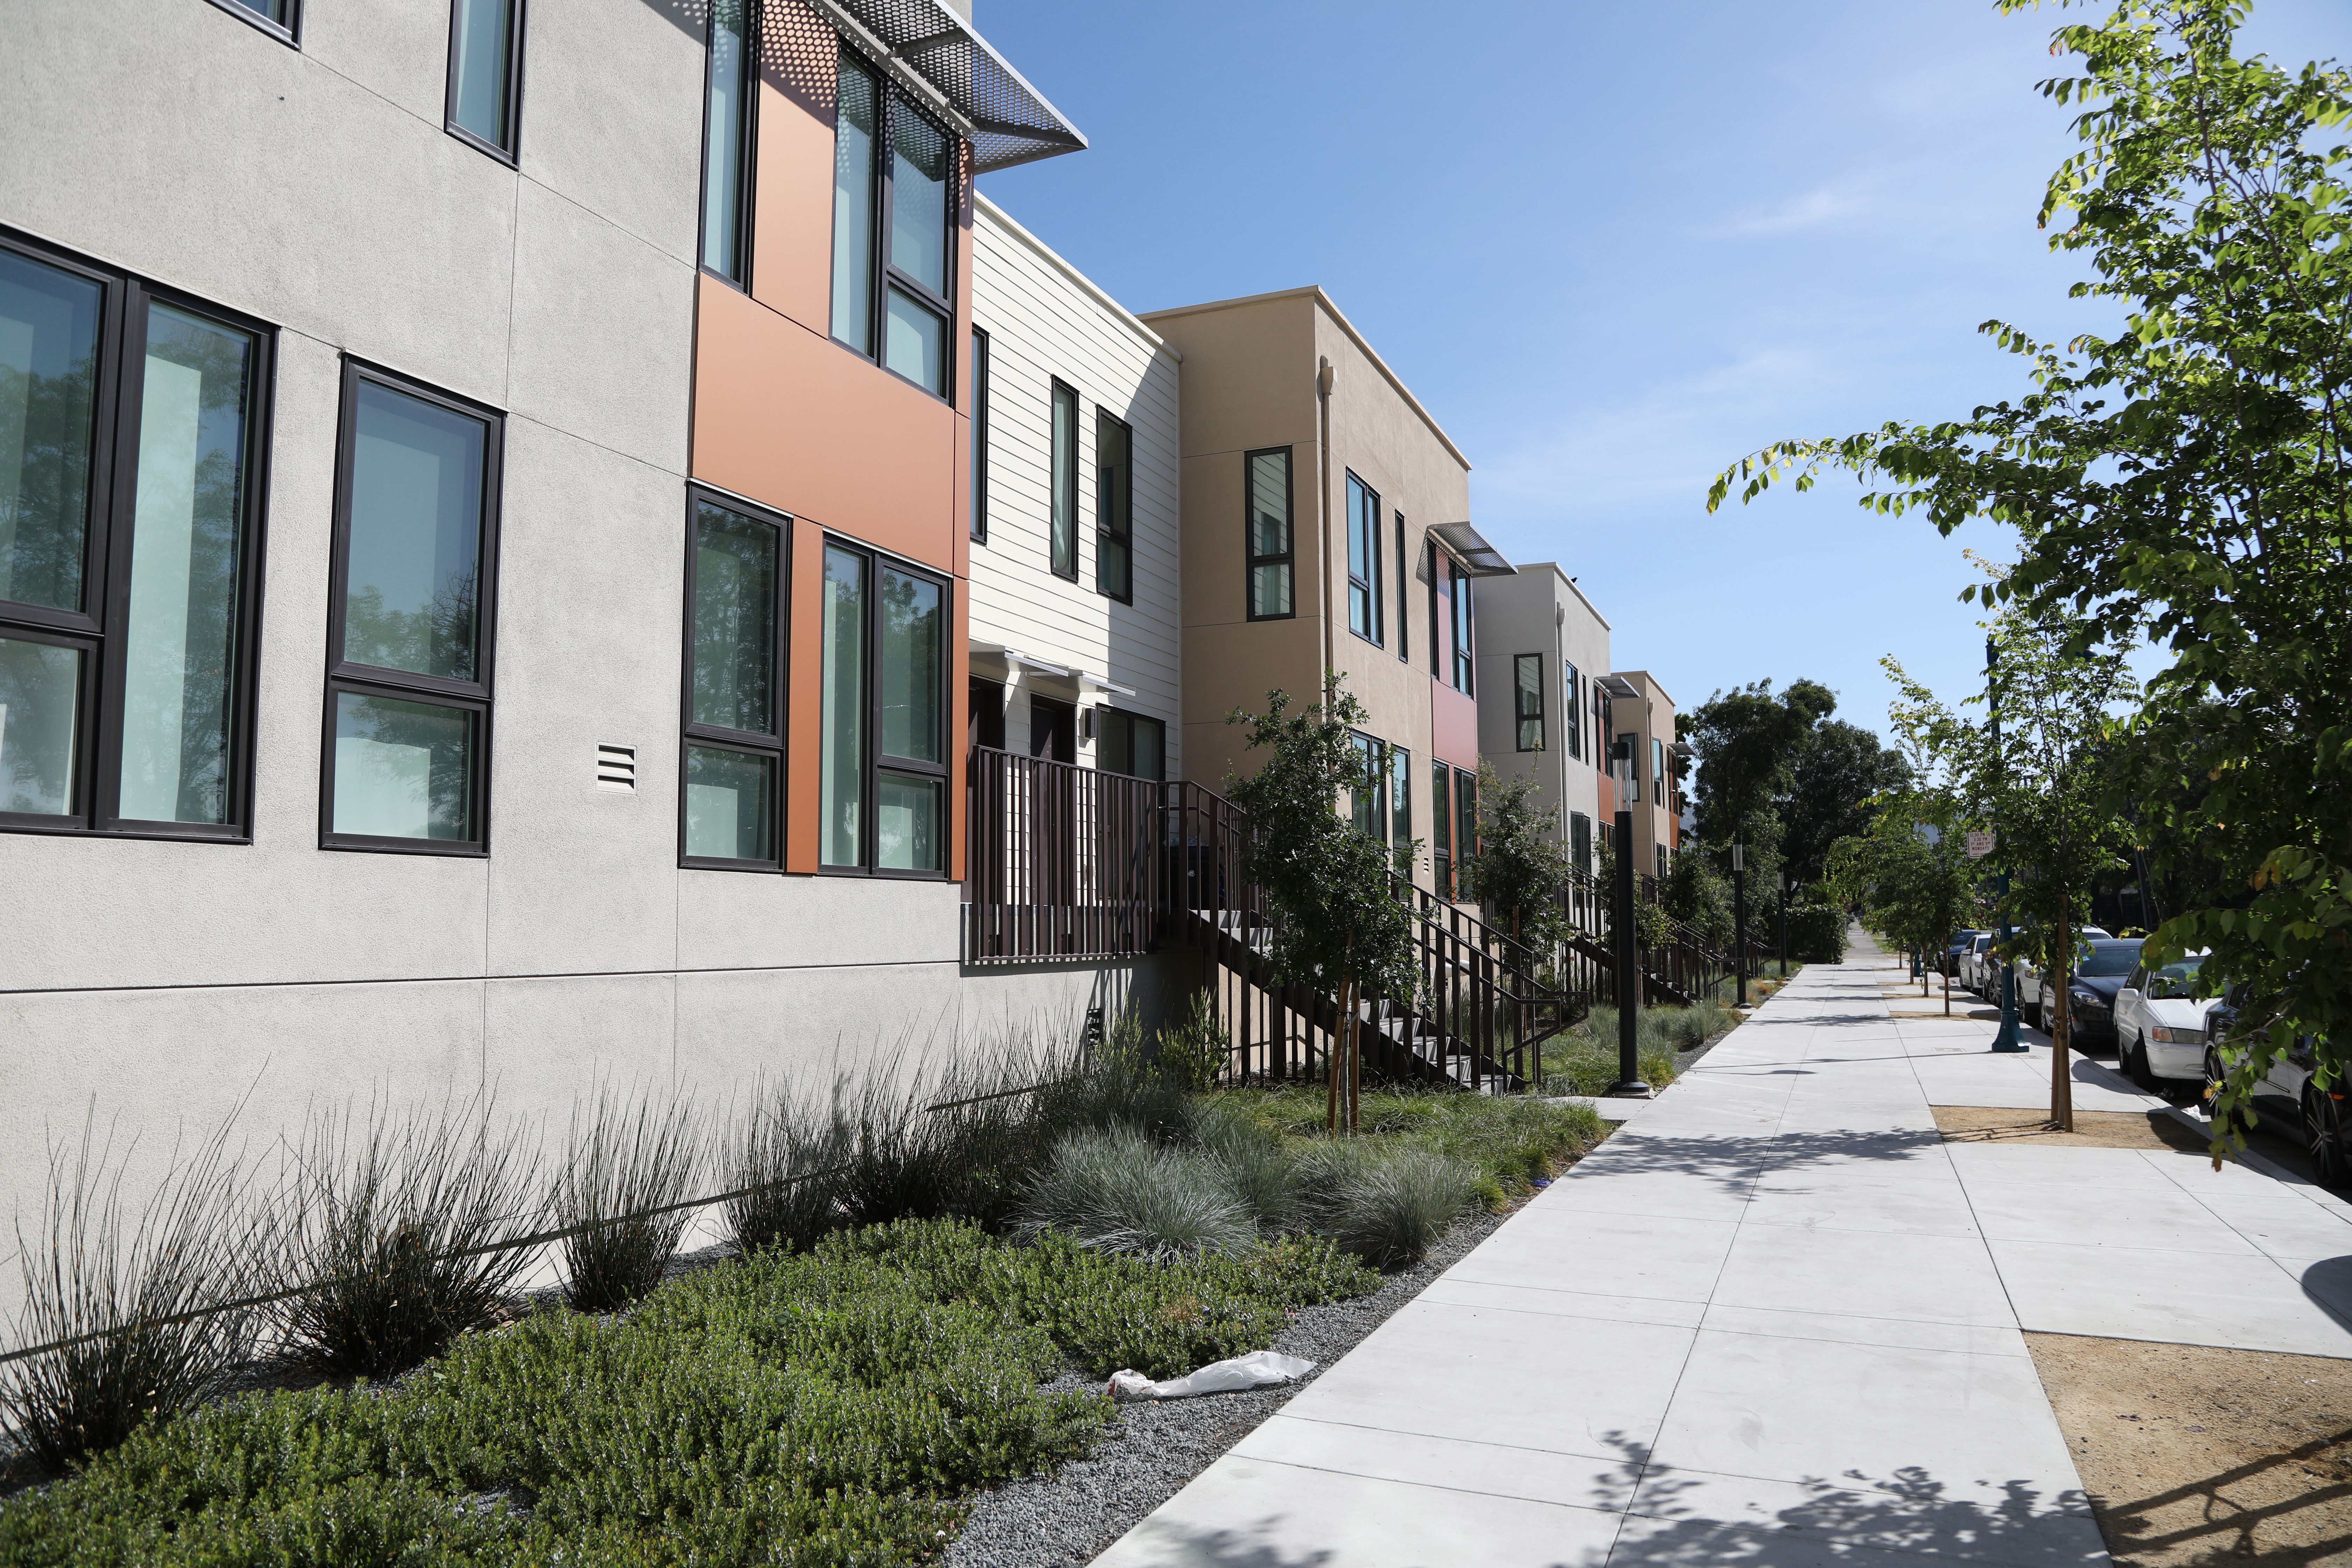 Wide sidewalks and environmentally friendly landscaping surround the apartment units